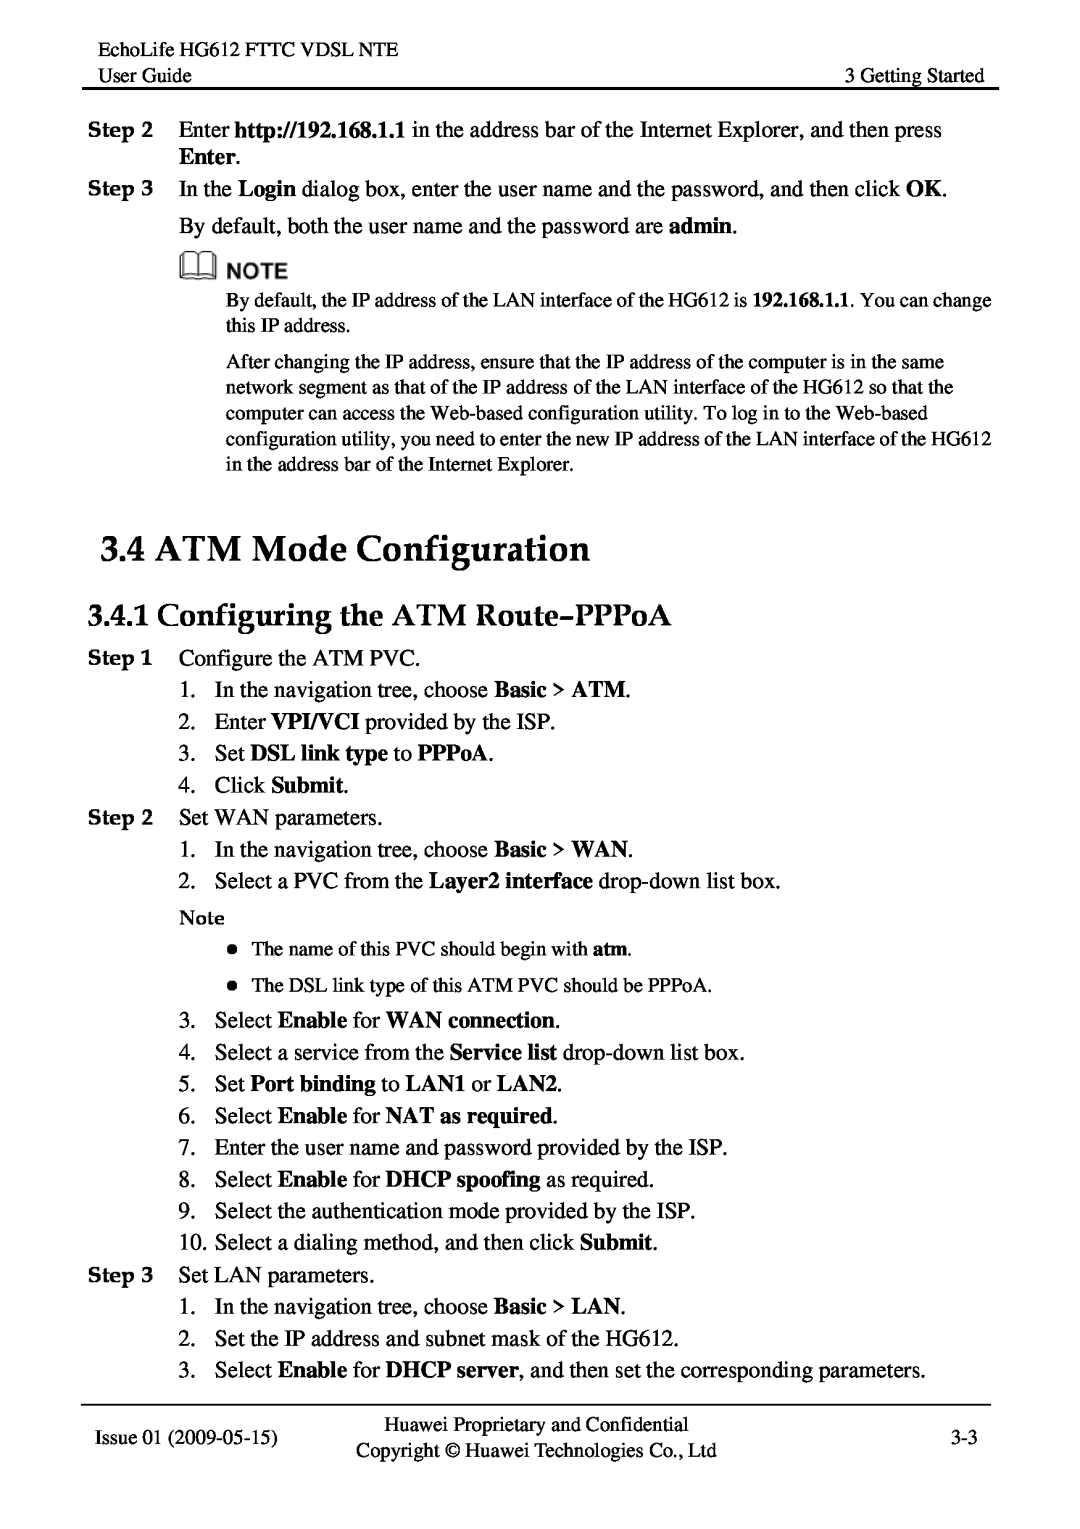 Huawei HG612FTTC VDSL NTE manual ATM Mode Configuration, Configuring the ATM Route-PPPoA, Enter, Set DSL link type to PPPoA 